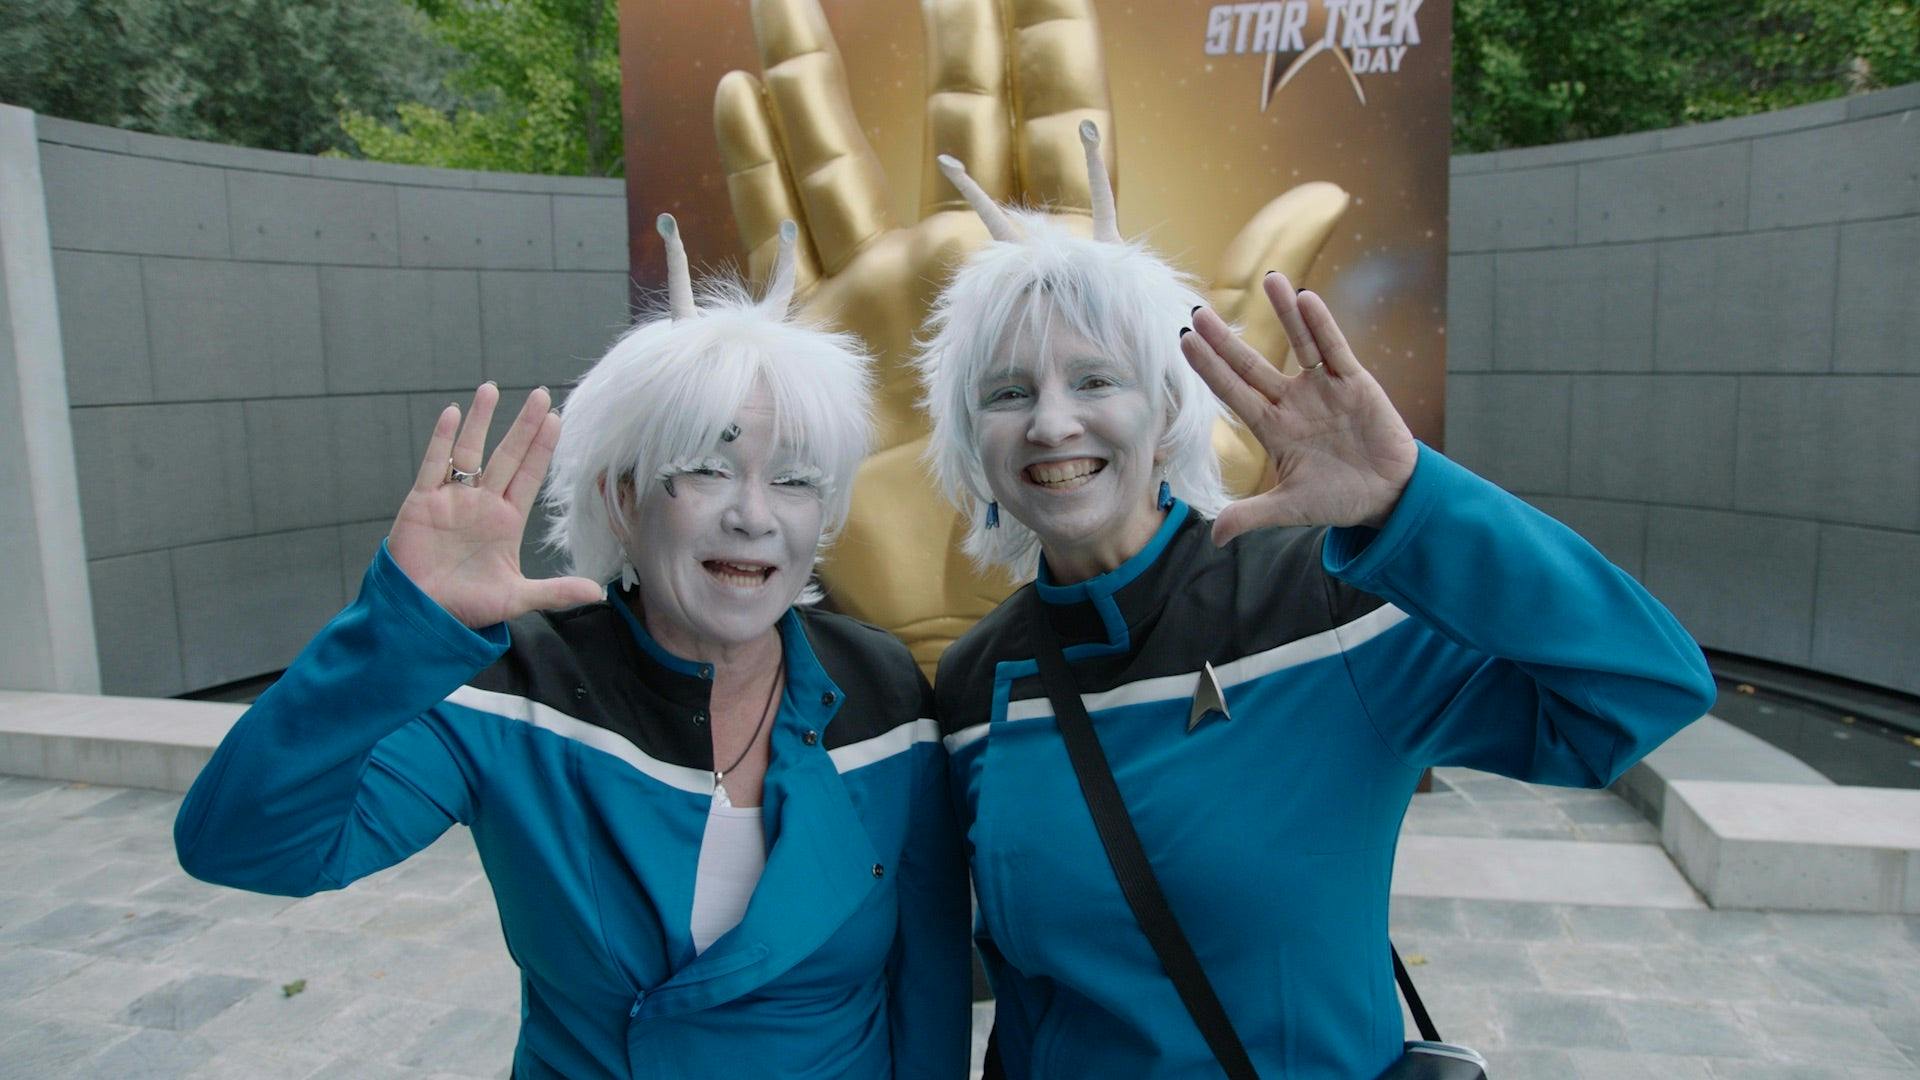 Two fans dressed as Aenar pose in front of a Vulcan salute statue. They are wearing blue Lower Decks uniforms and are giving the camera the Vulcan salute.